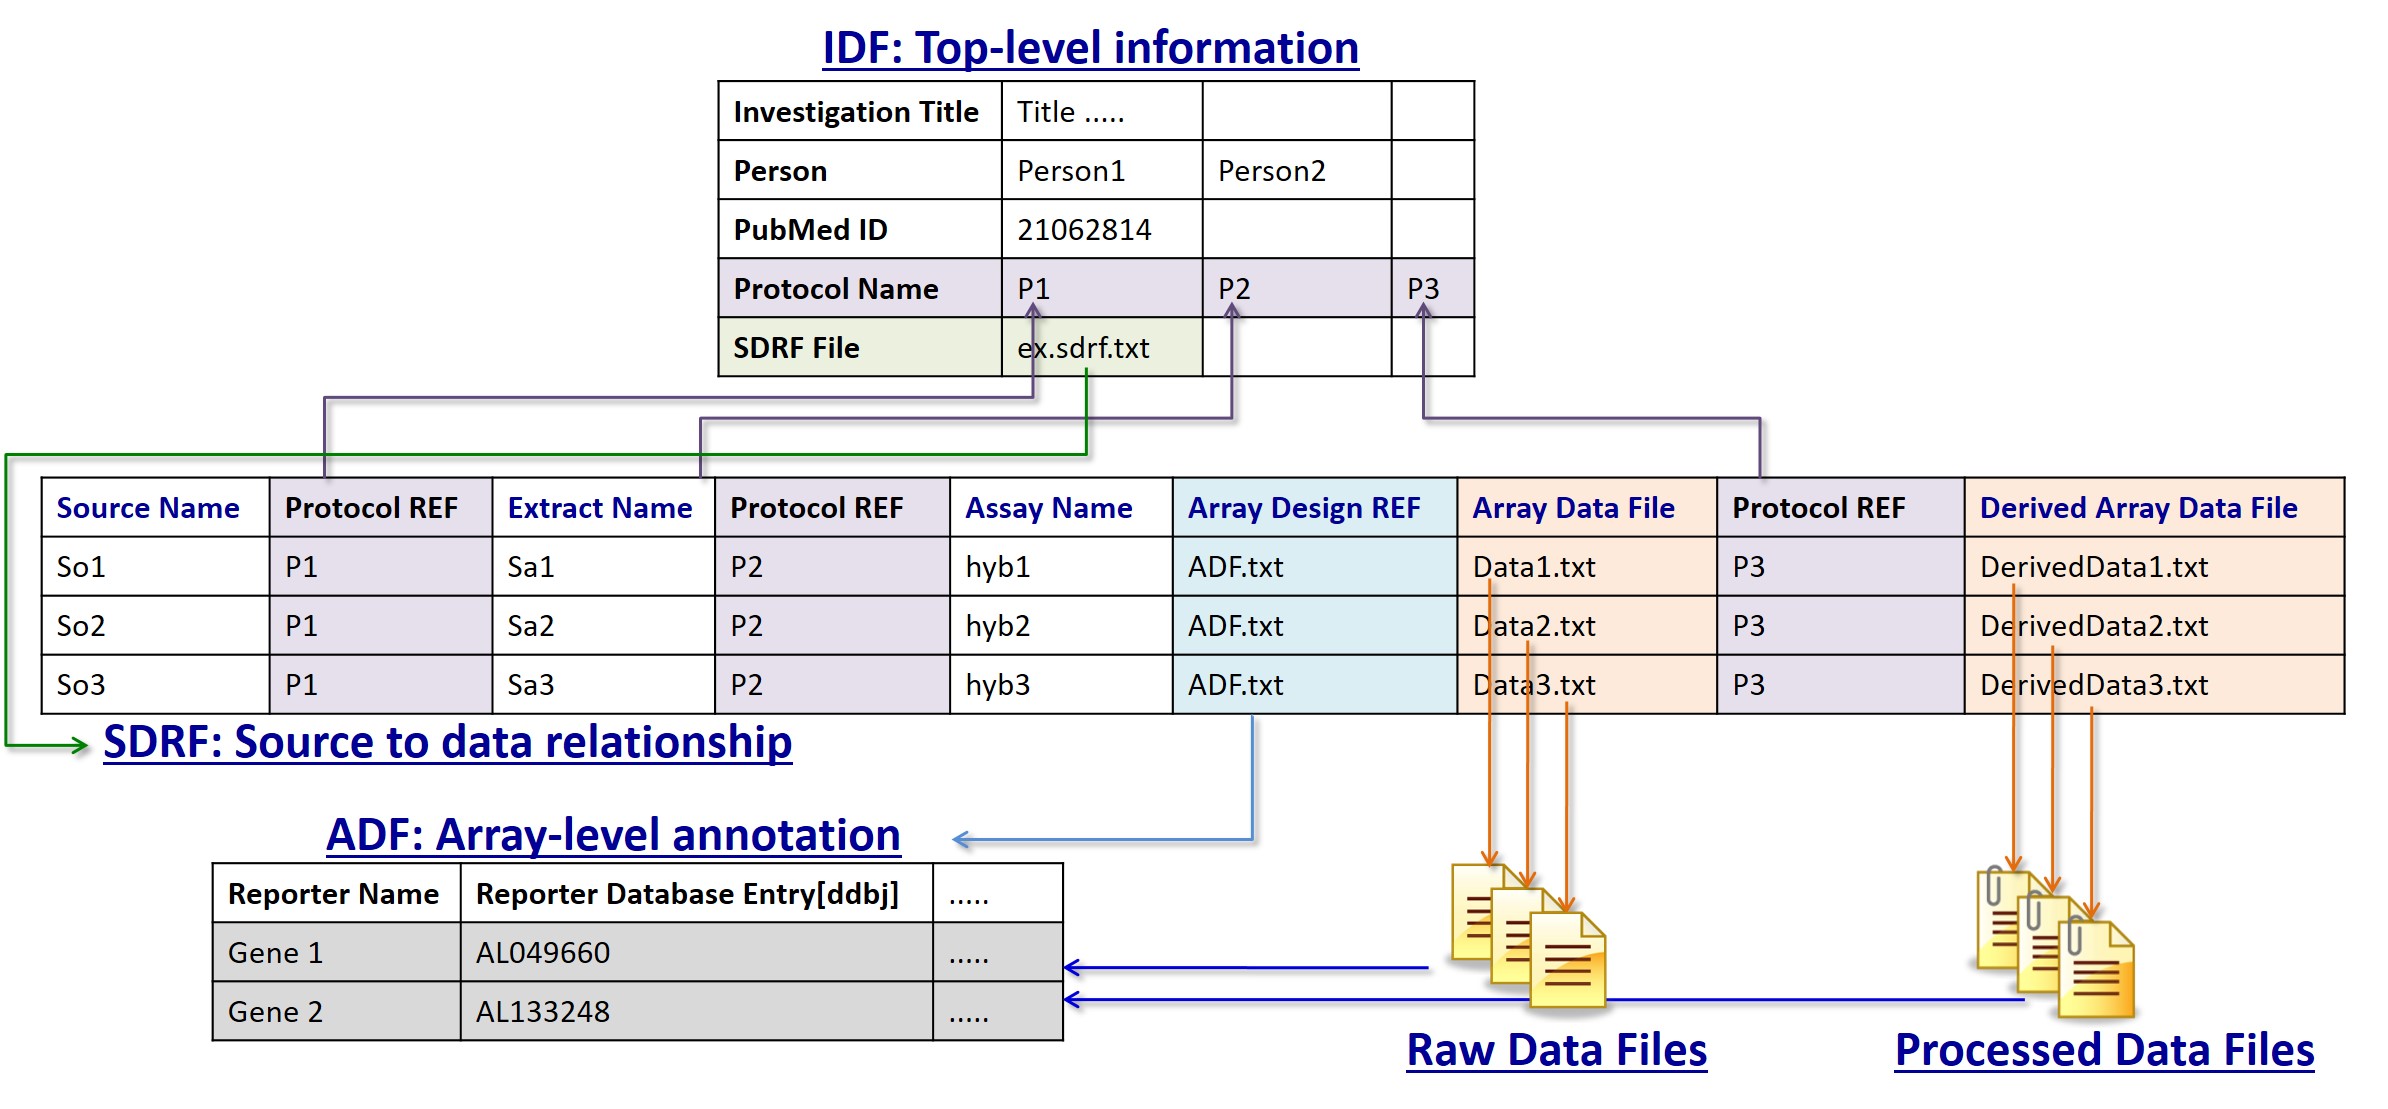 Relationships between IDF, SDRF, ADF and raw and processed data files